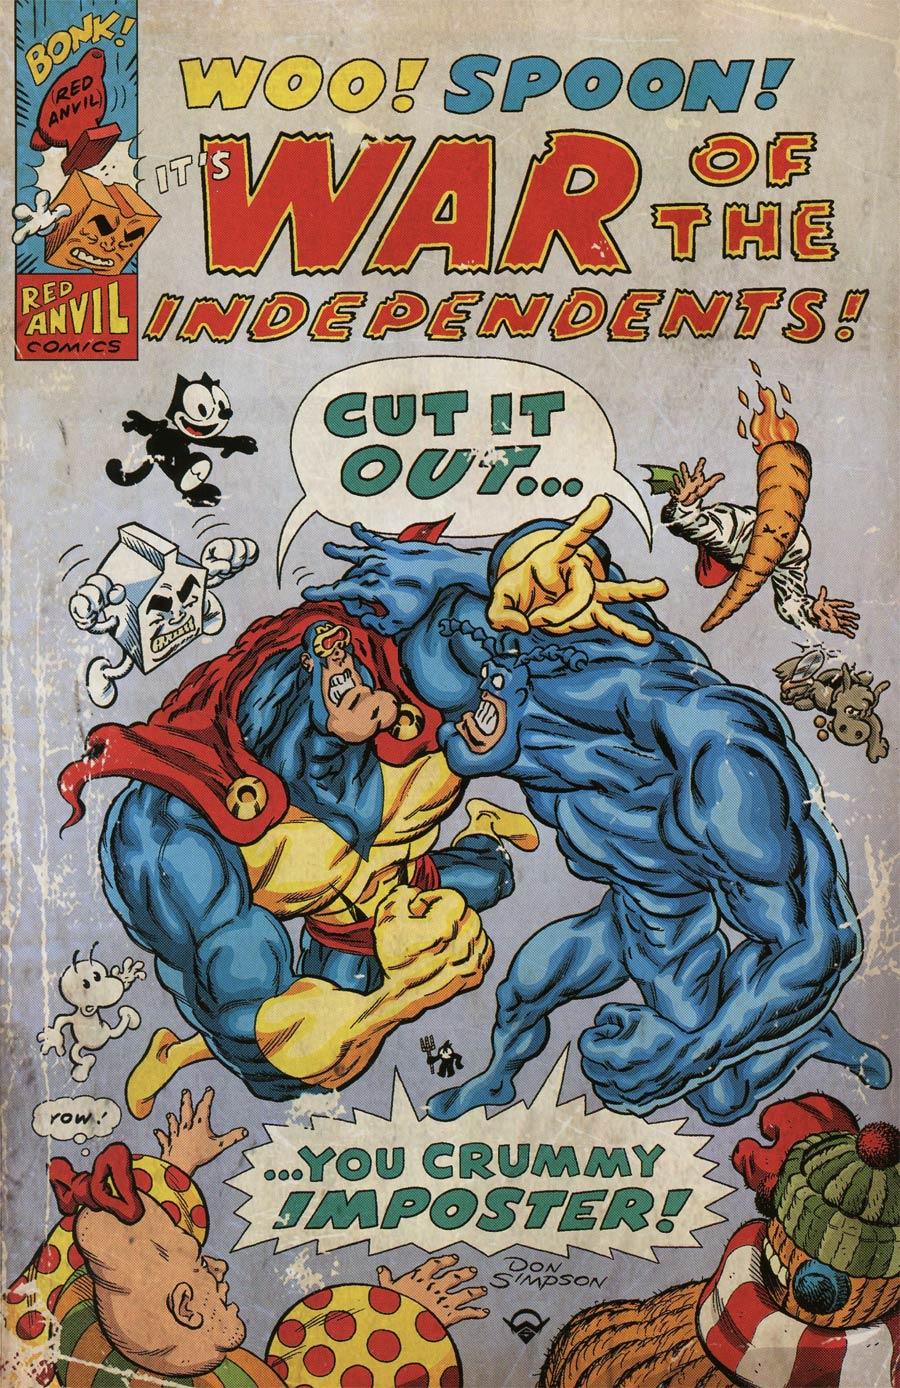 War Of The Independents Vol. 1 #4